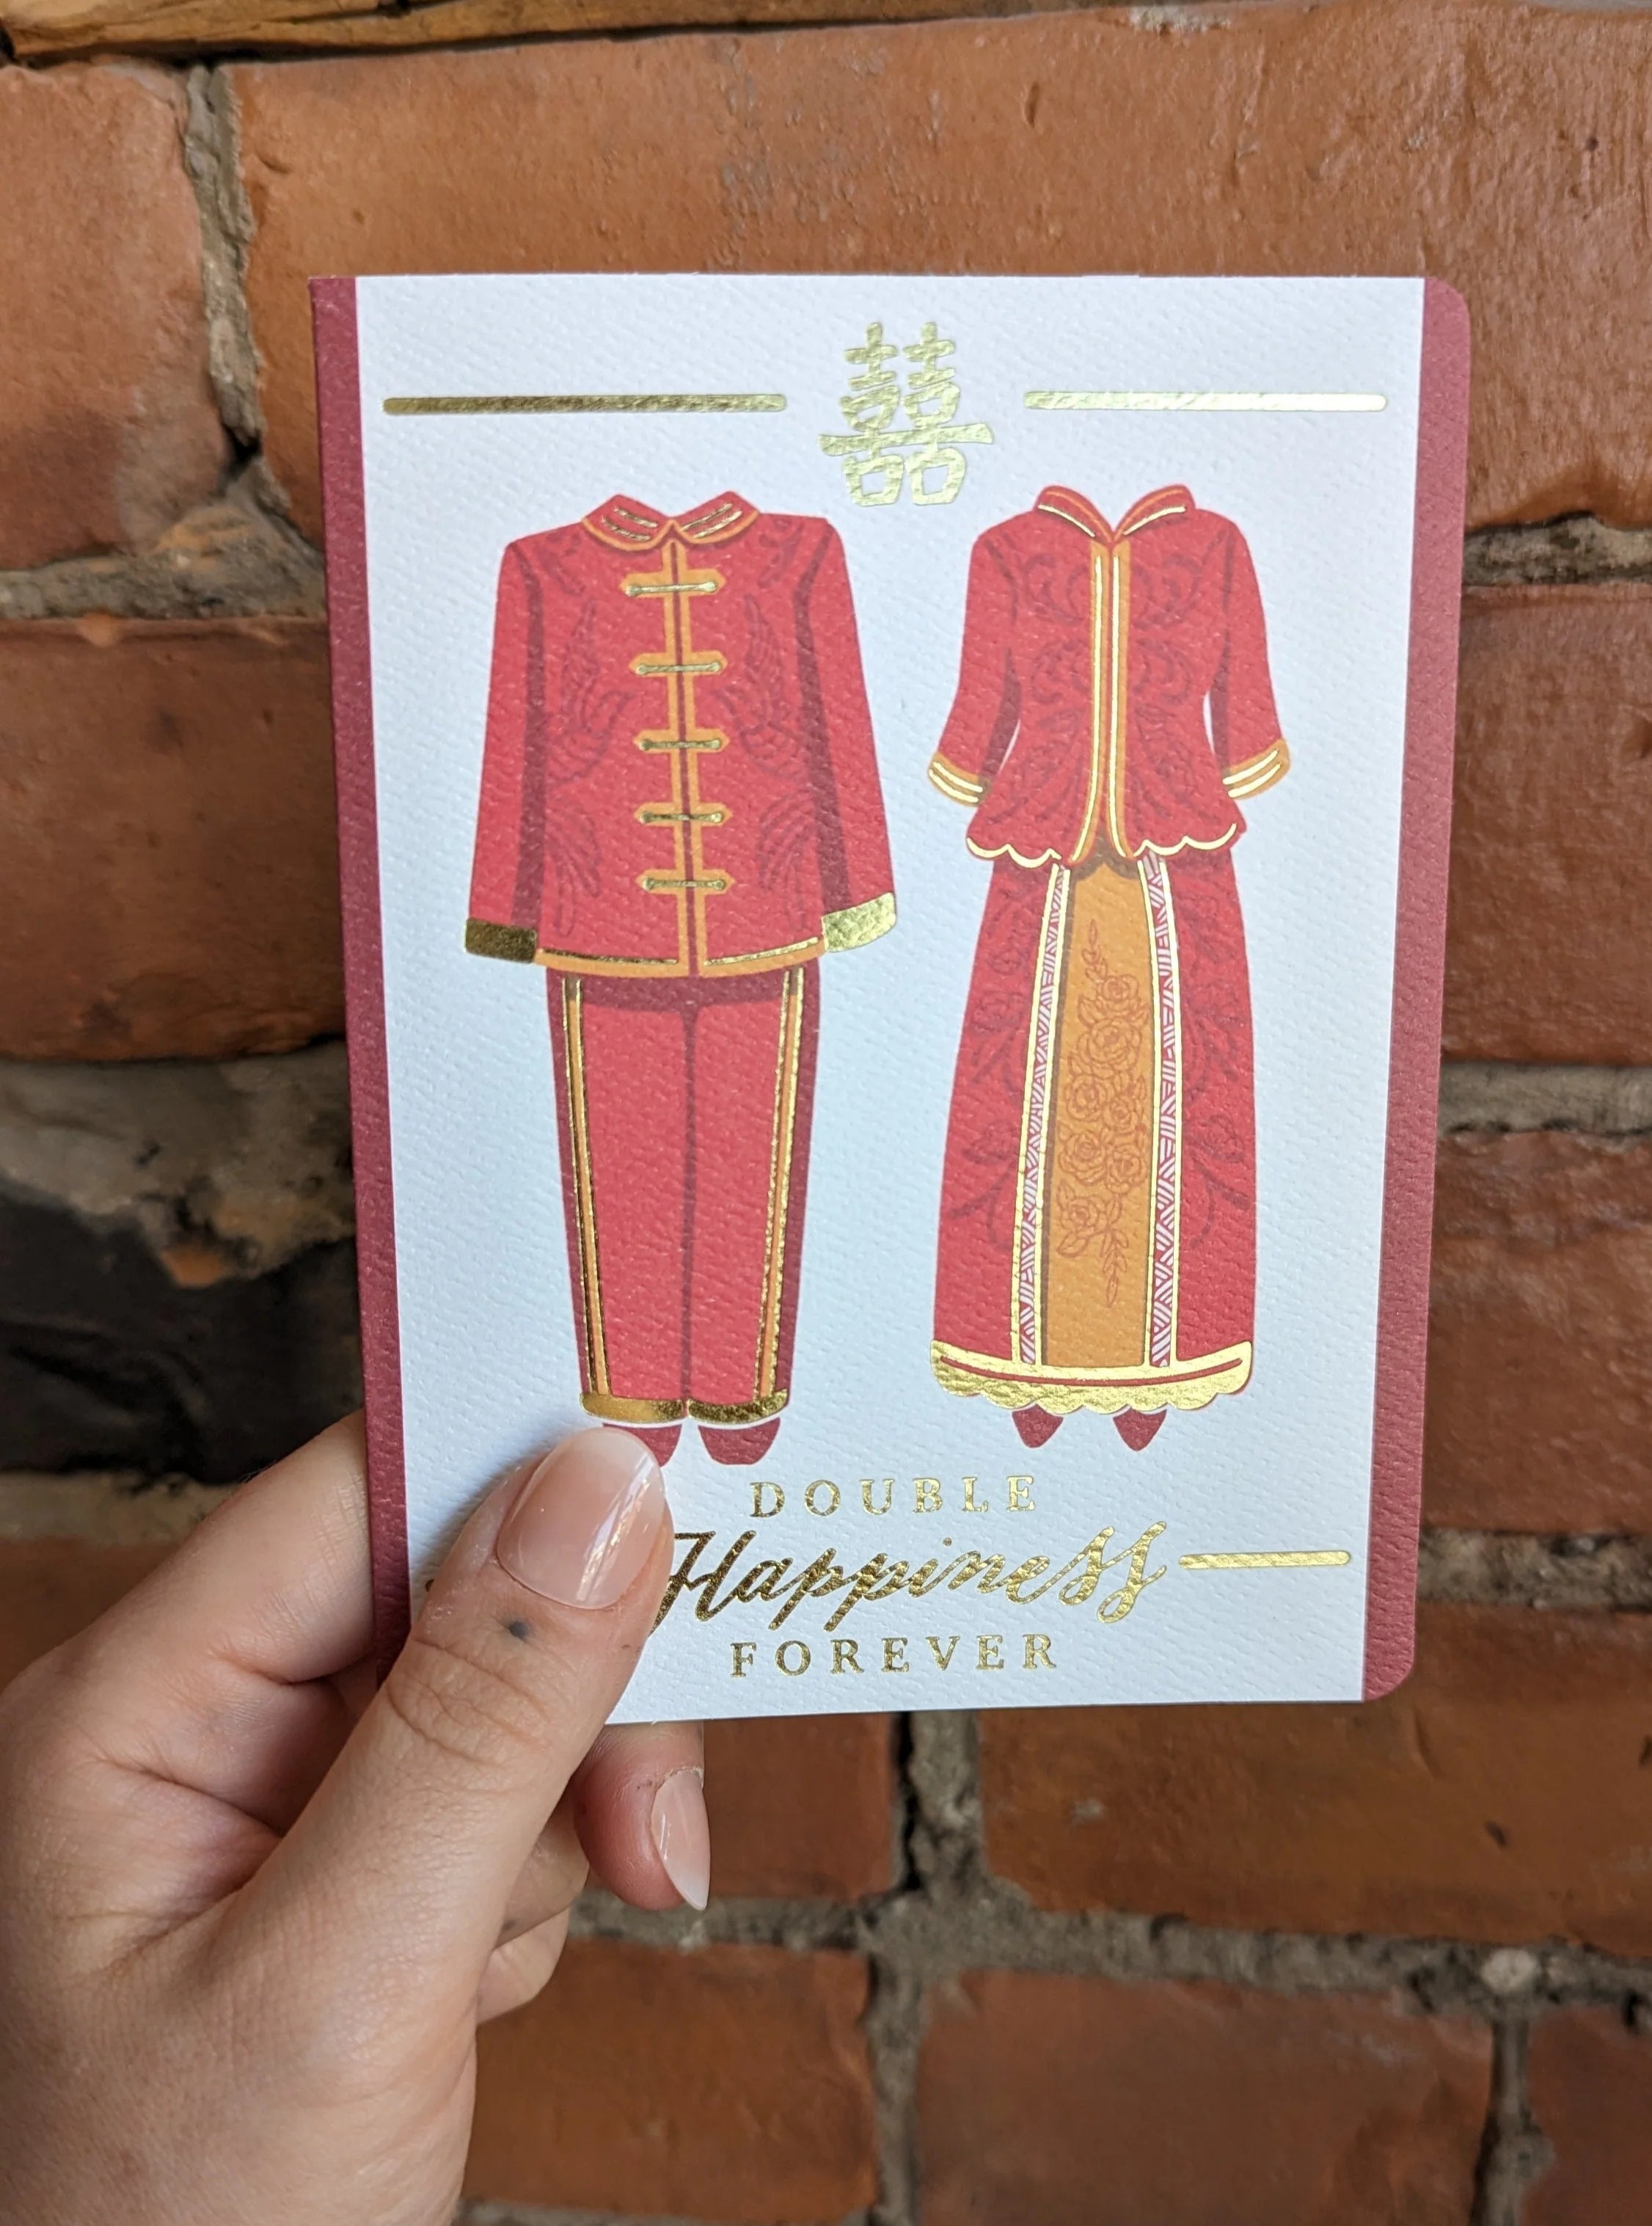 Double Happiness Wedding Greeting Card